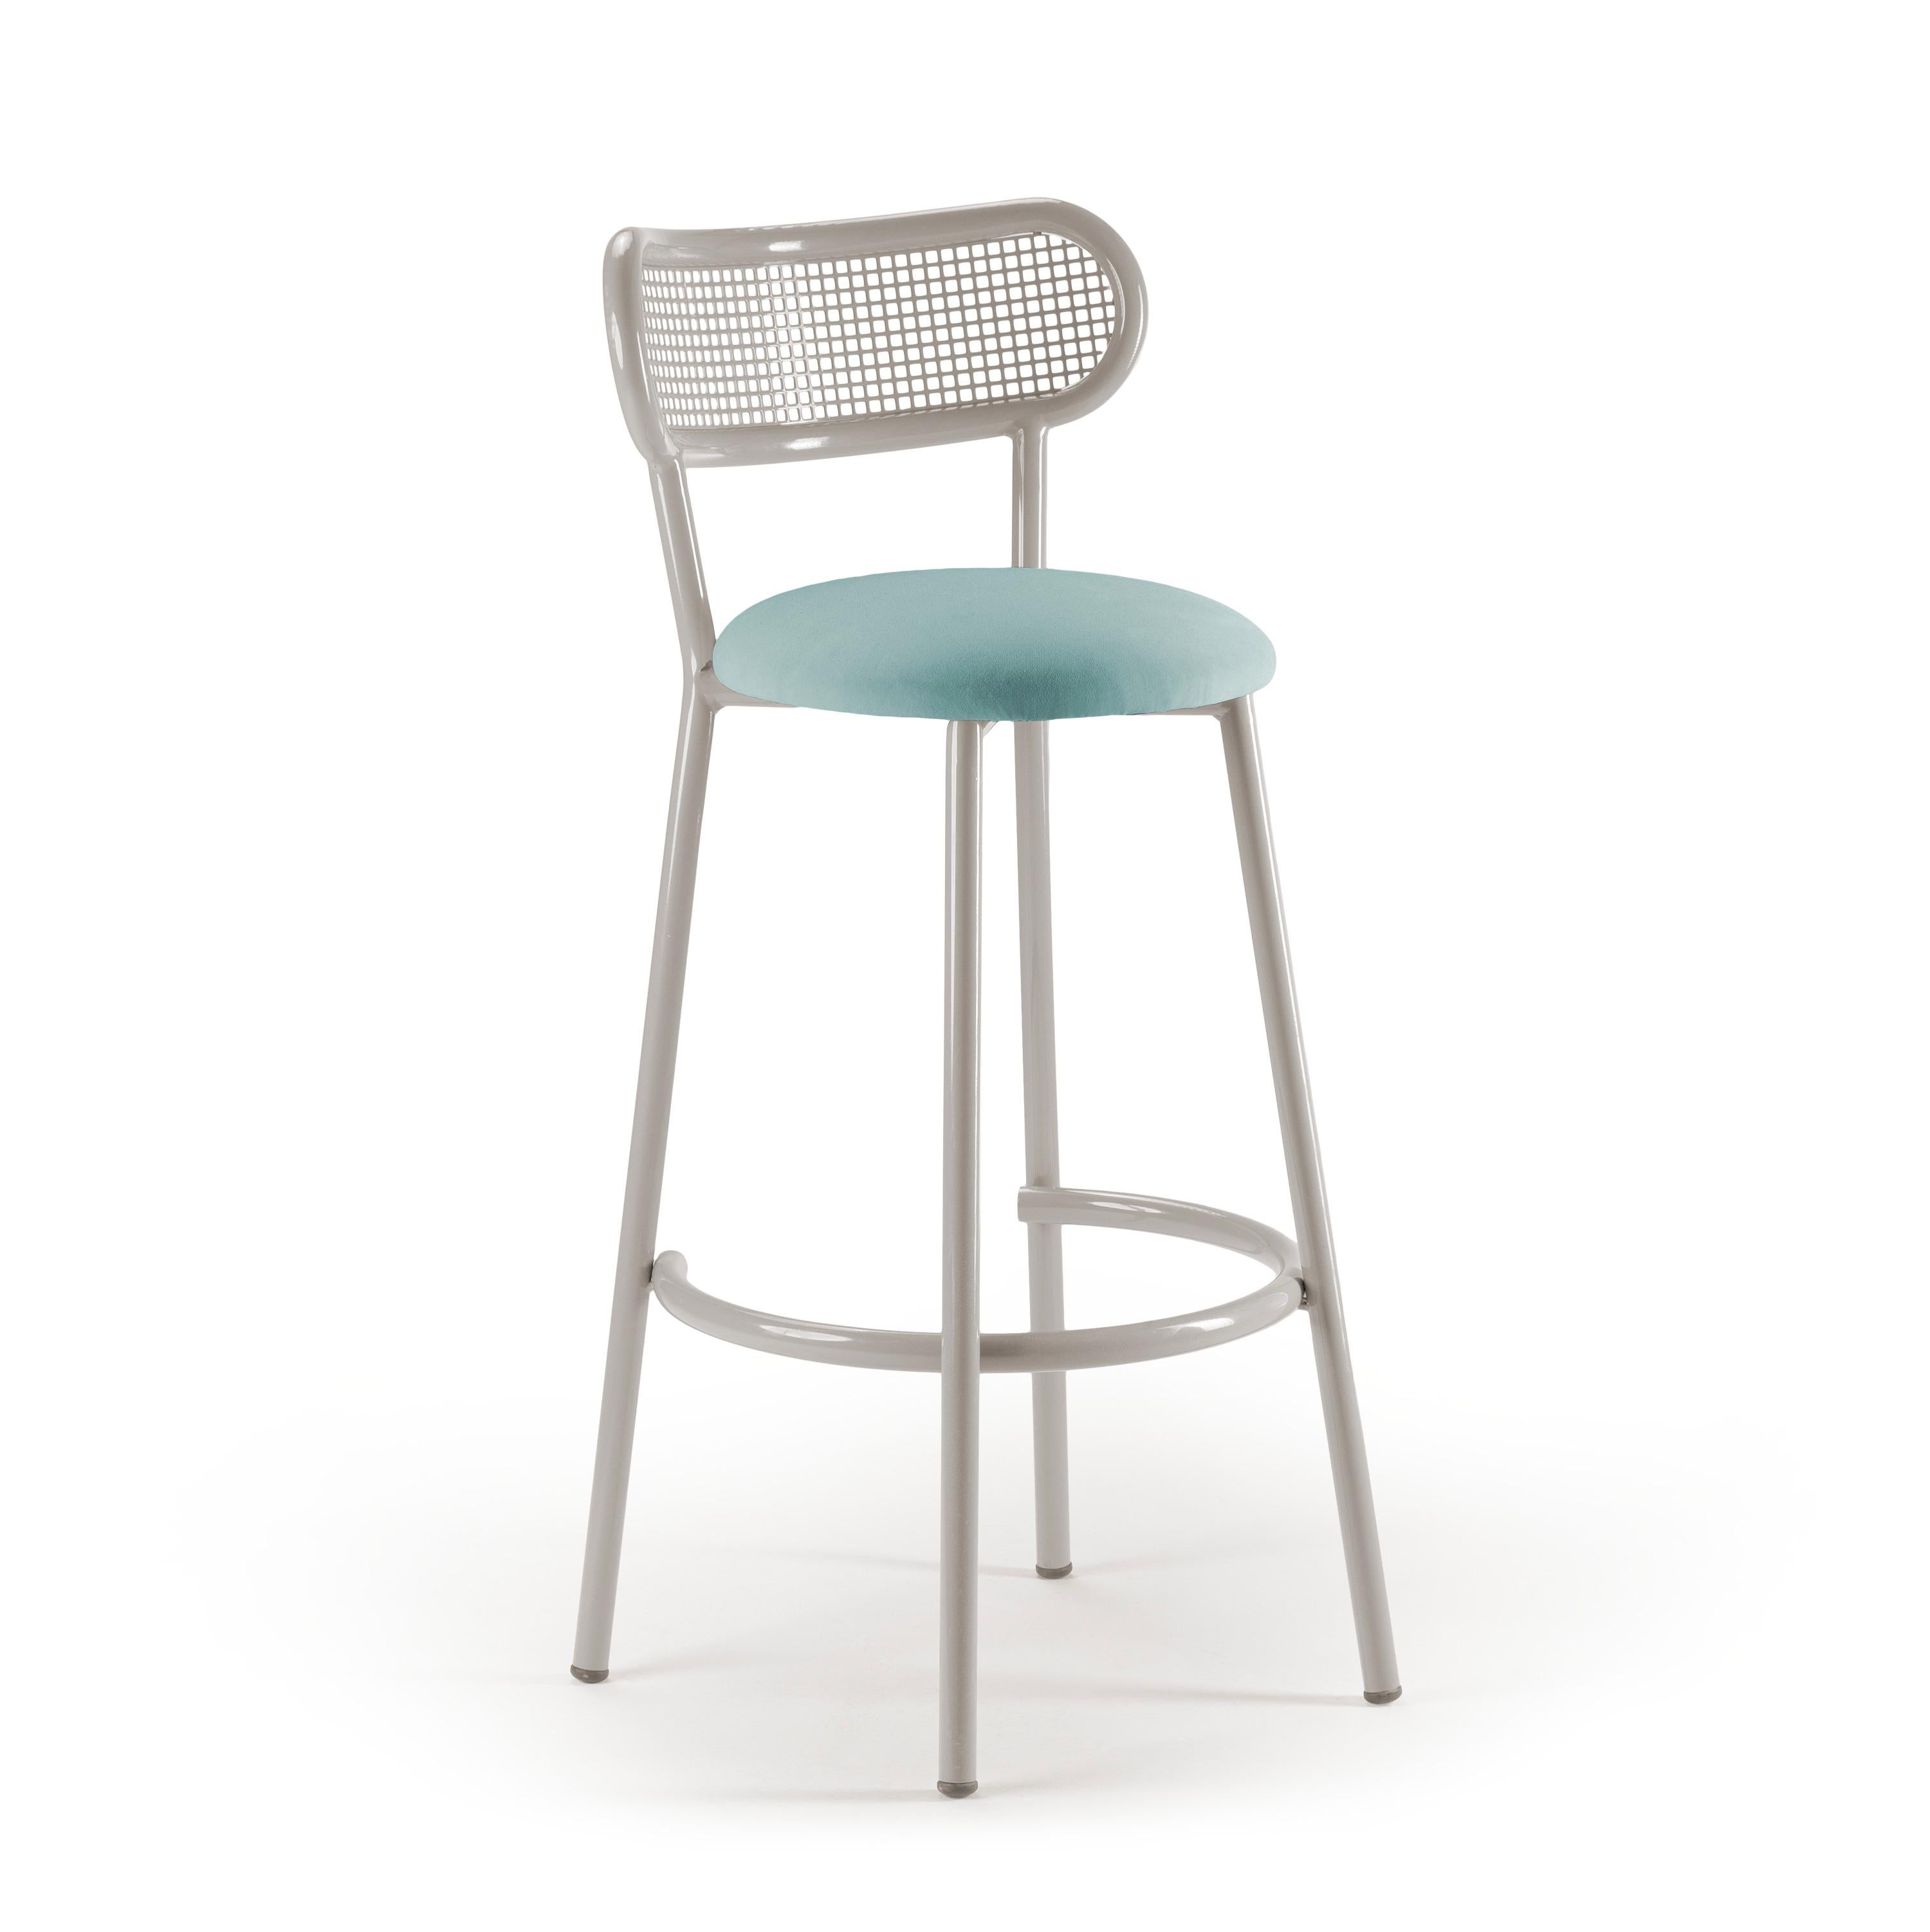 Portuguese Louise Bar Chair with Salmon Structure, Perforated Steel Back and Upholstery For Sale